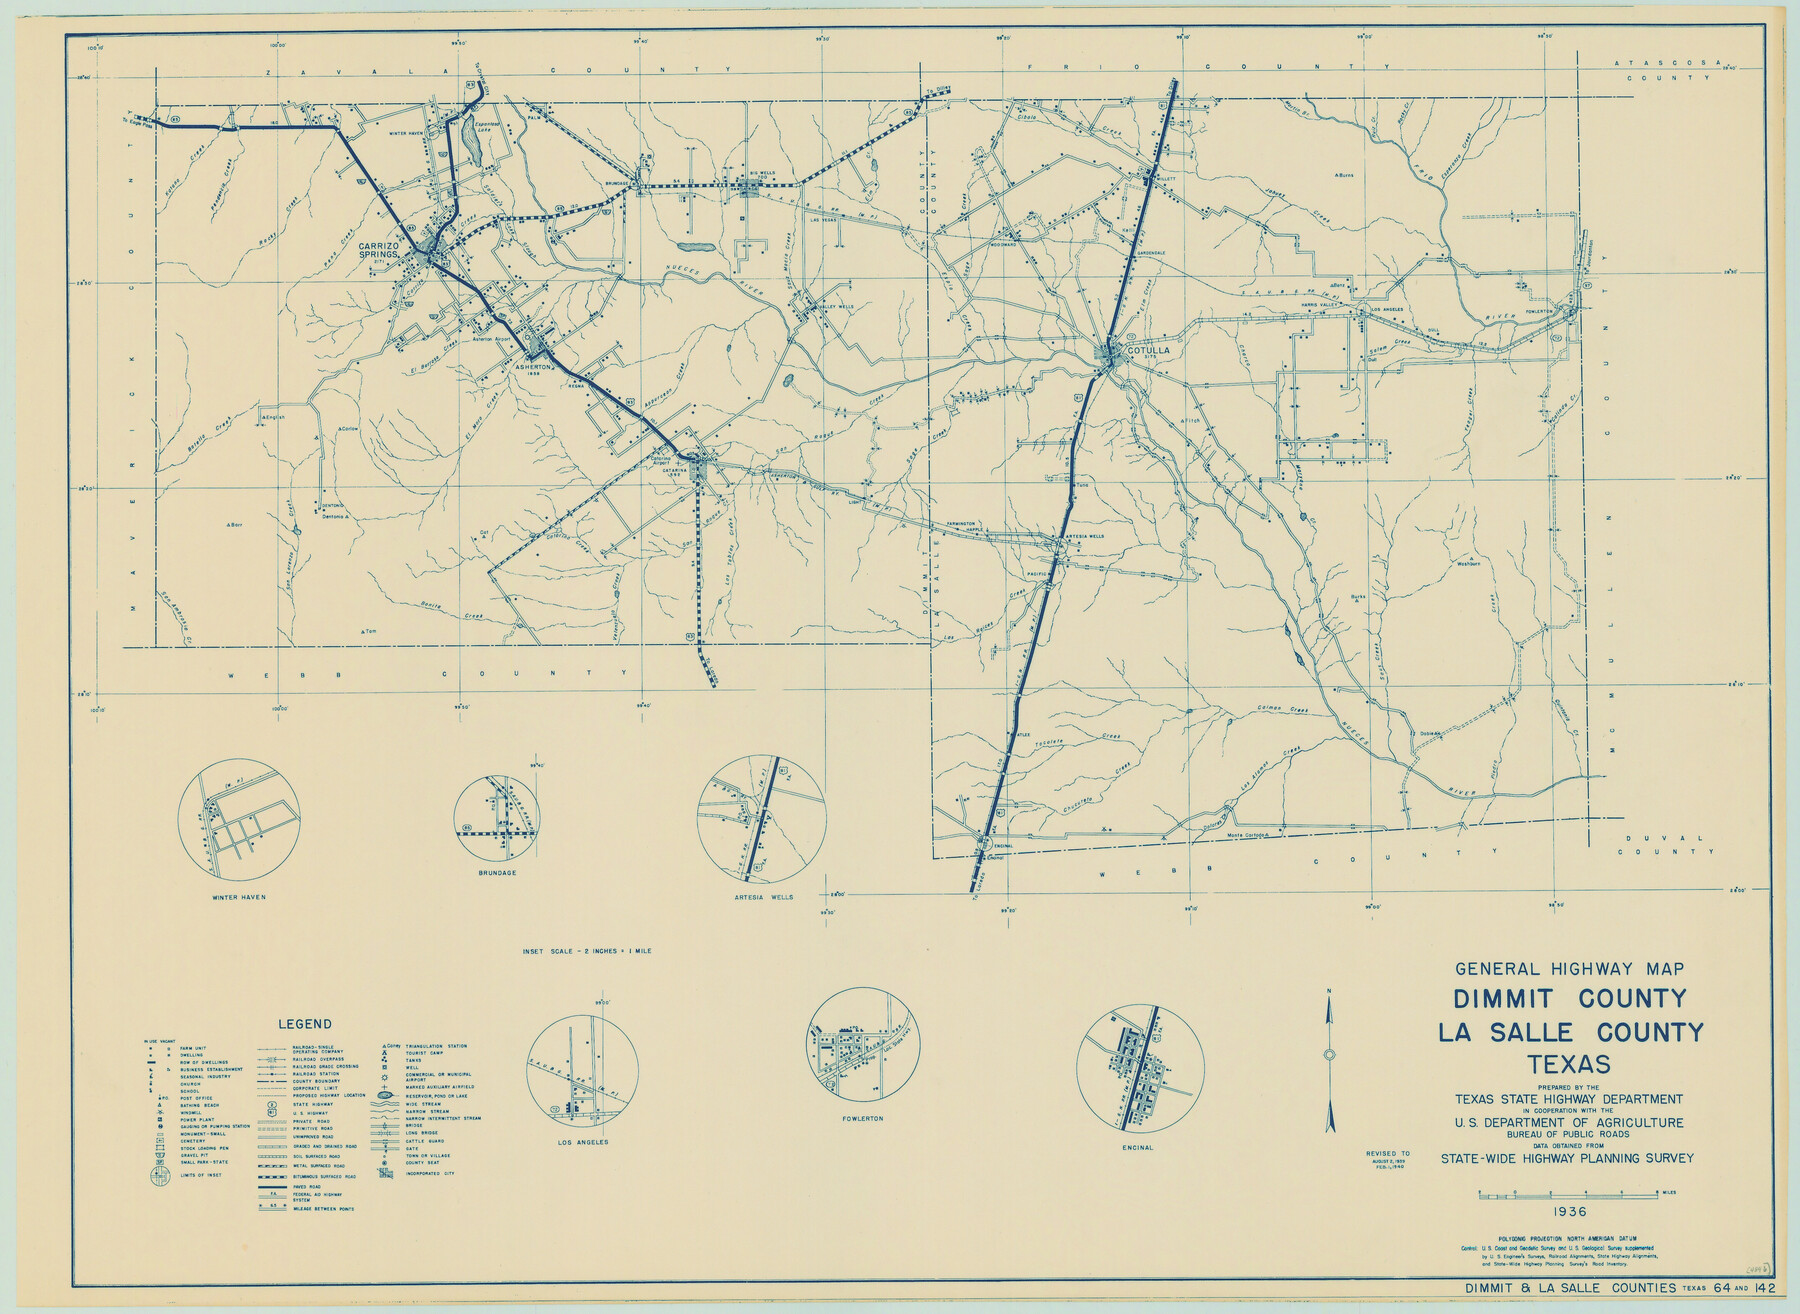 79077, General Highway Map, Dimmit County, La Salle County, Texas, Texas State Library and Archives